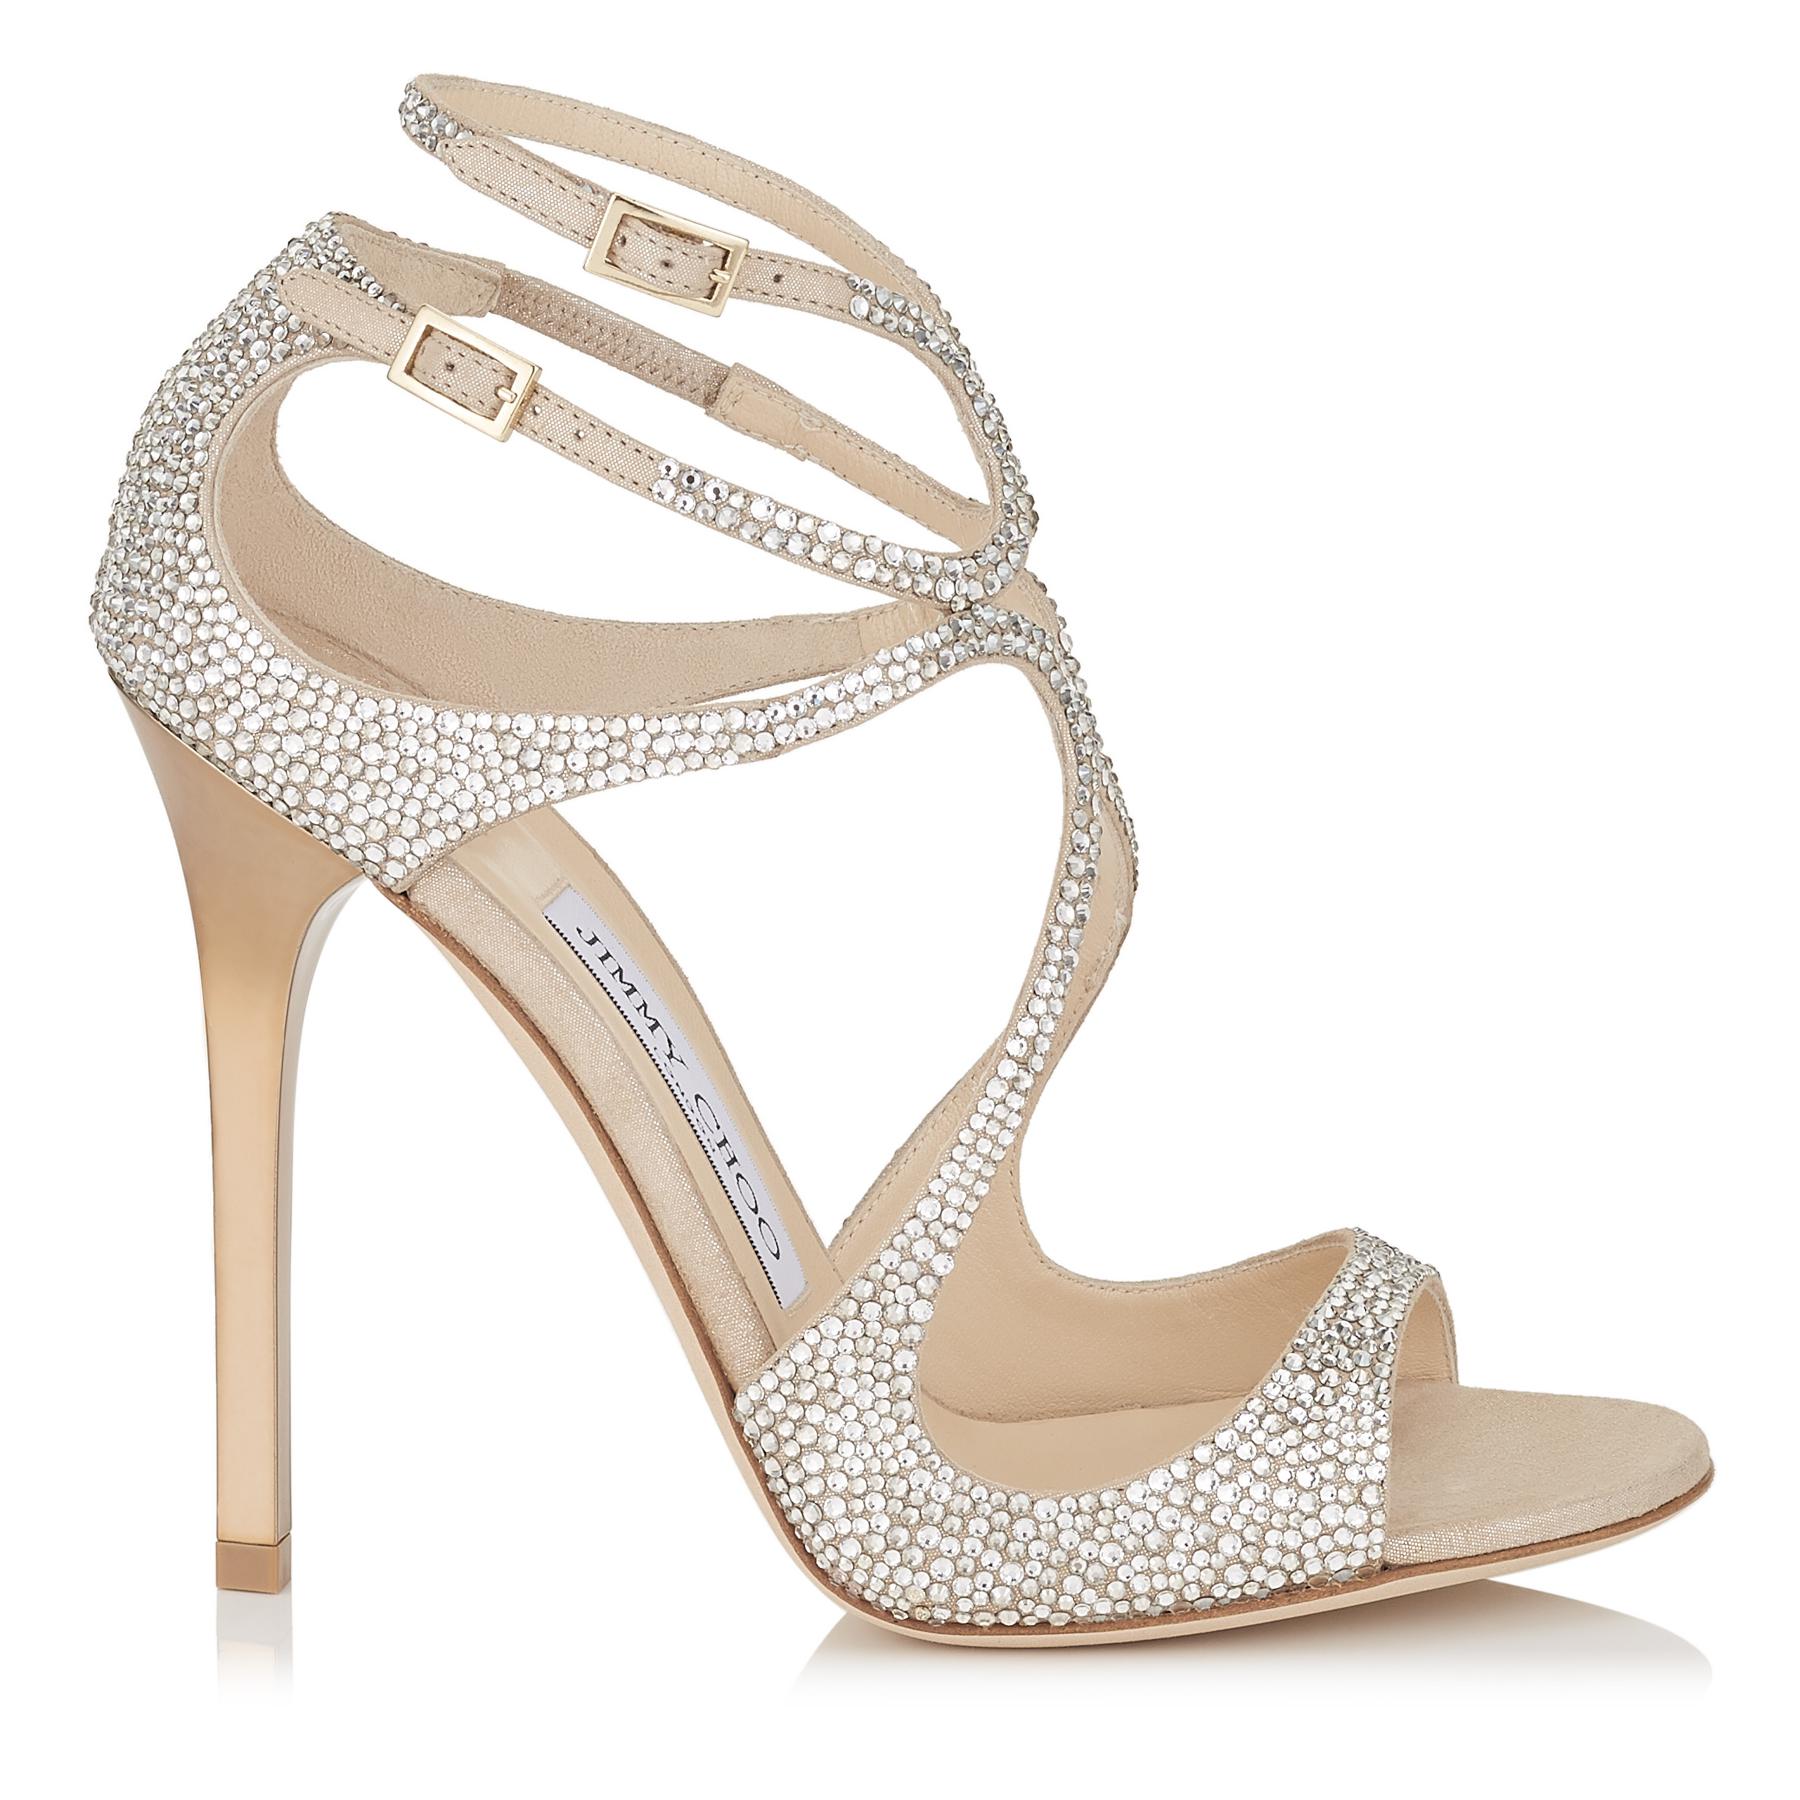 Lyst - Jimmy Choo Ivette Nude Suede Sandals With Hotfixed Crystals in ...